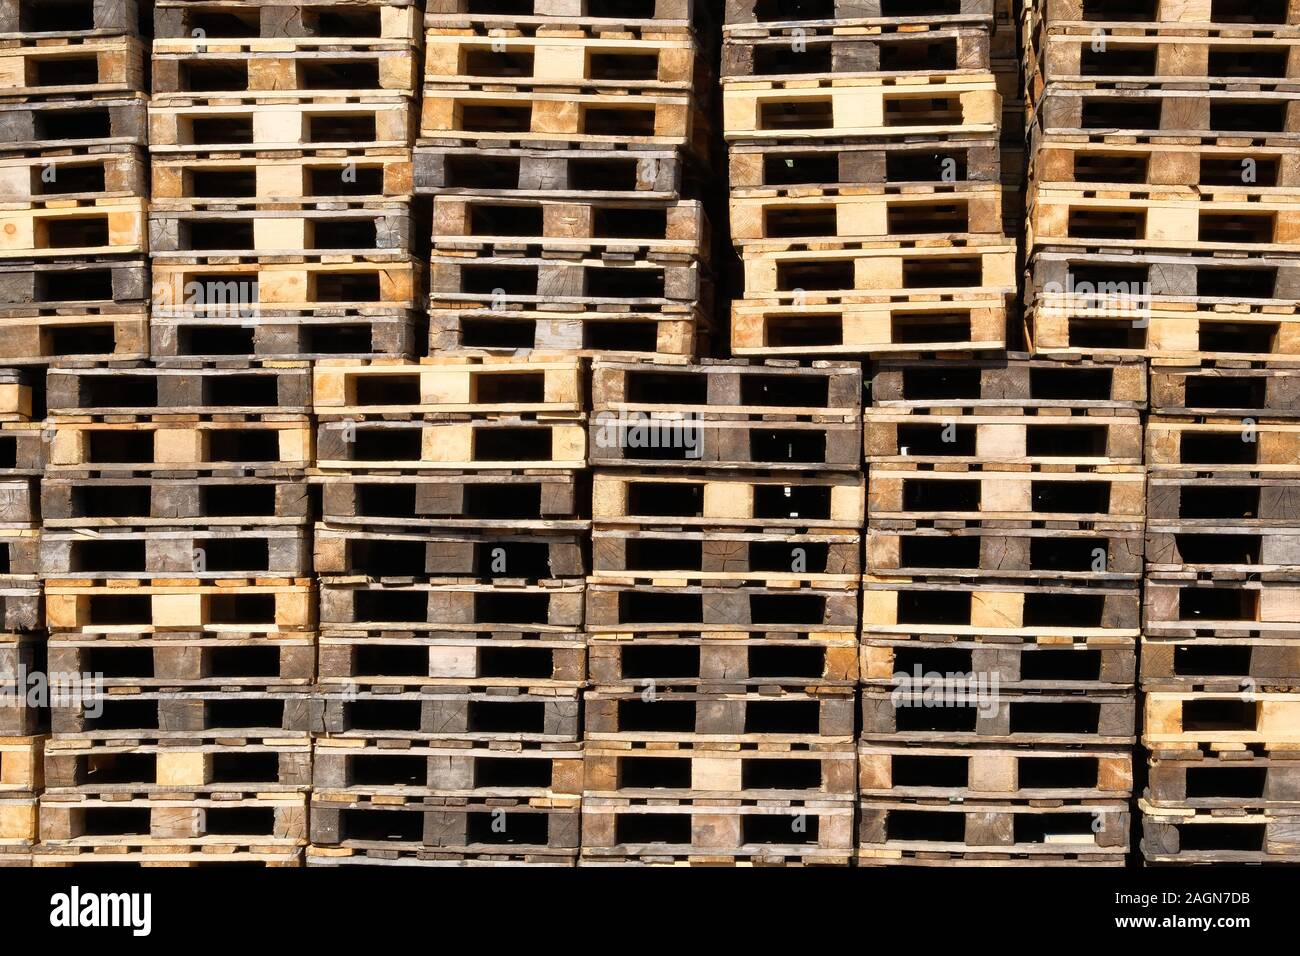 Pallets background. Stacks of rough wooden pallets at warehouse in industrial yard. Cargo and shipping concept. Stock Photo